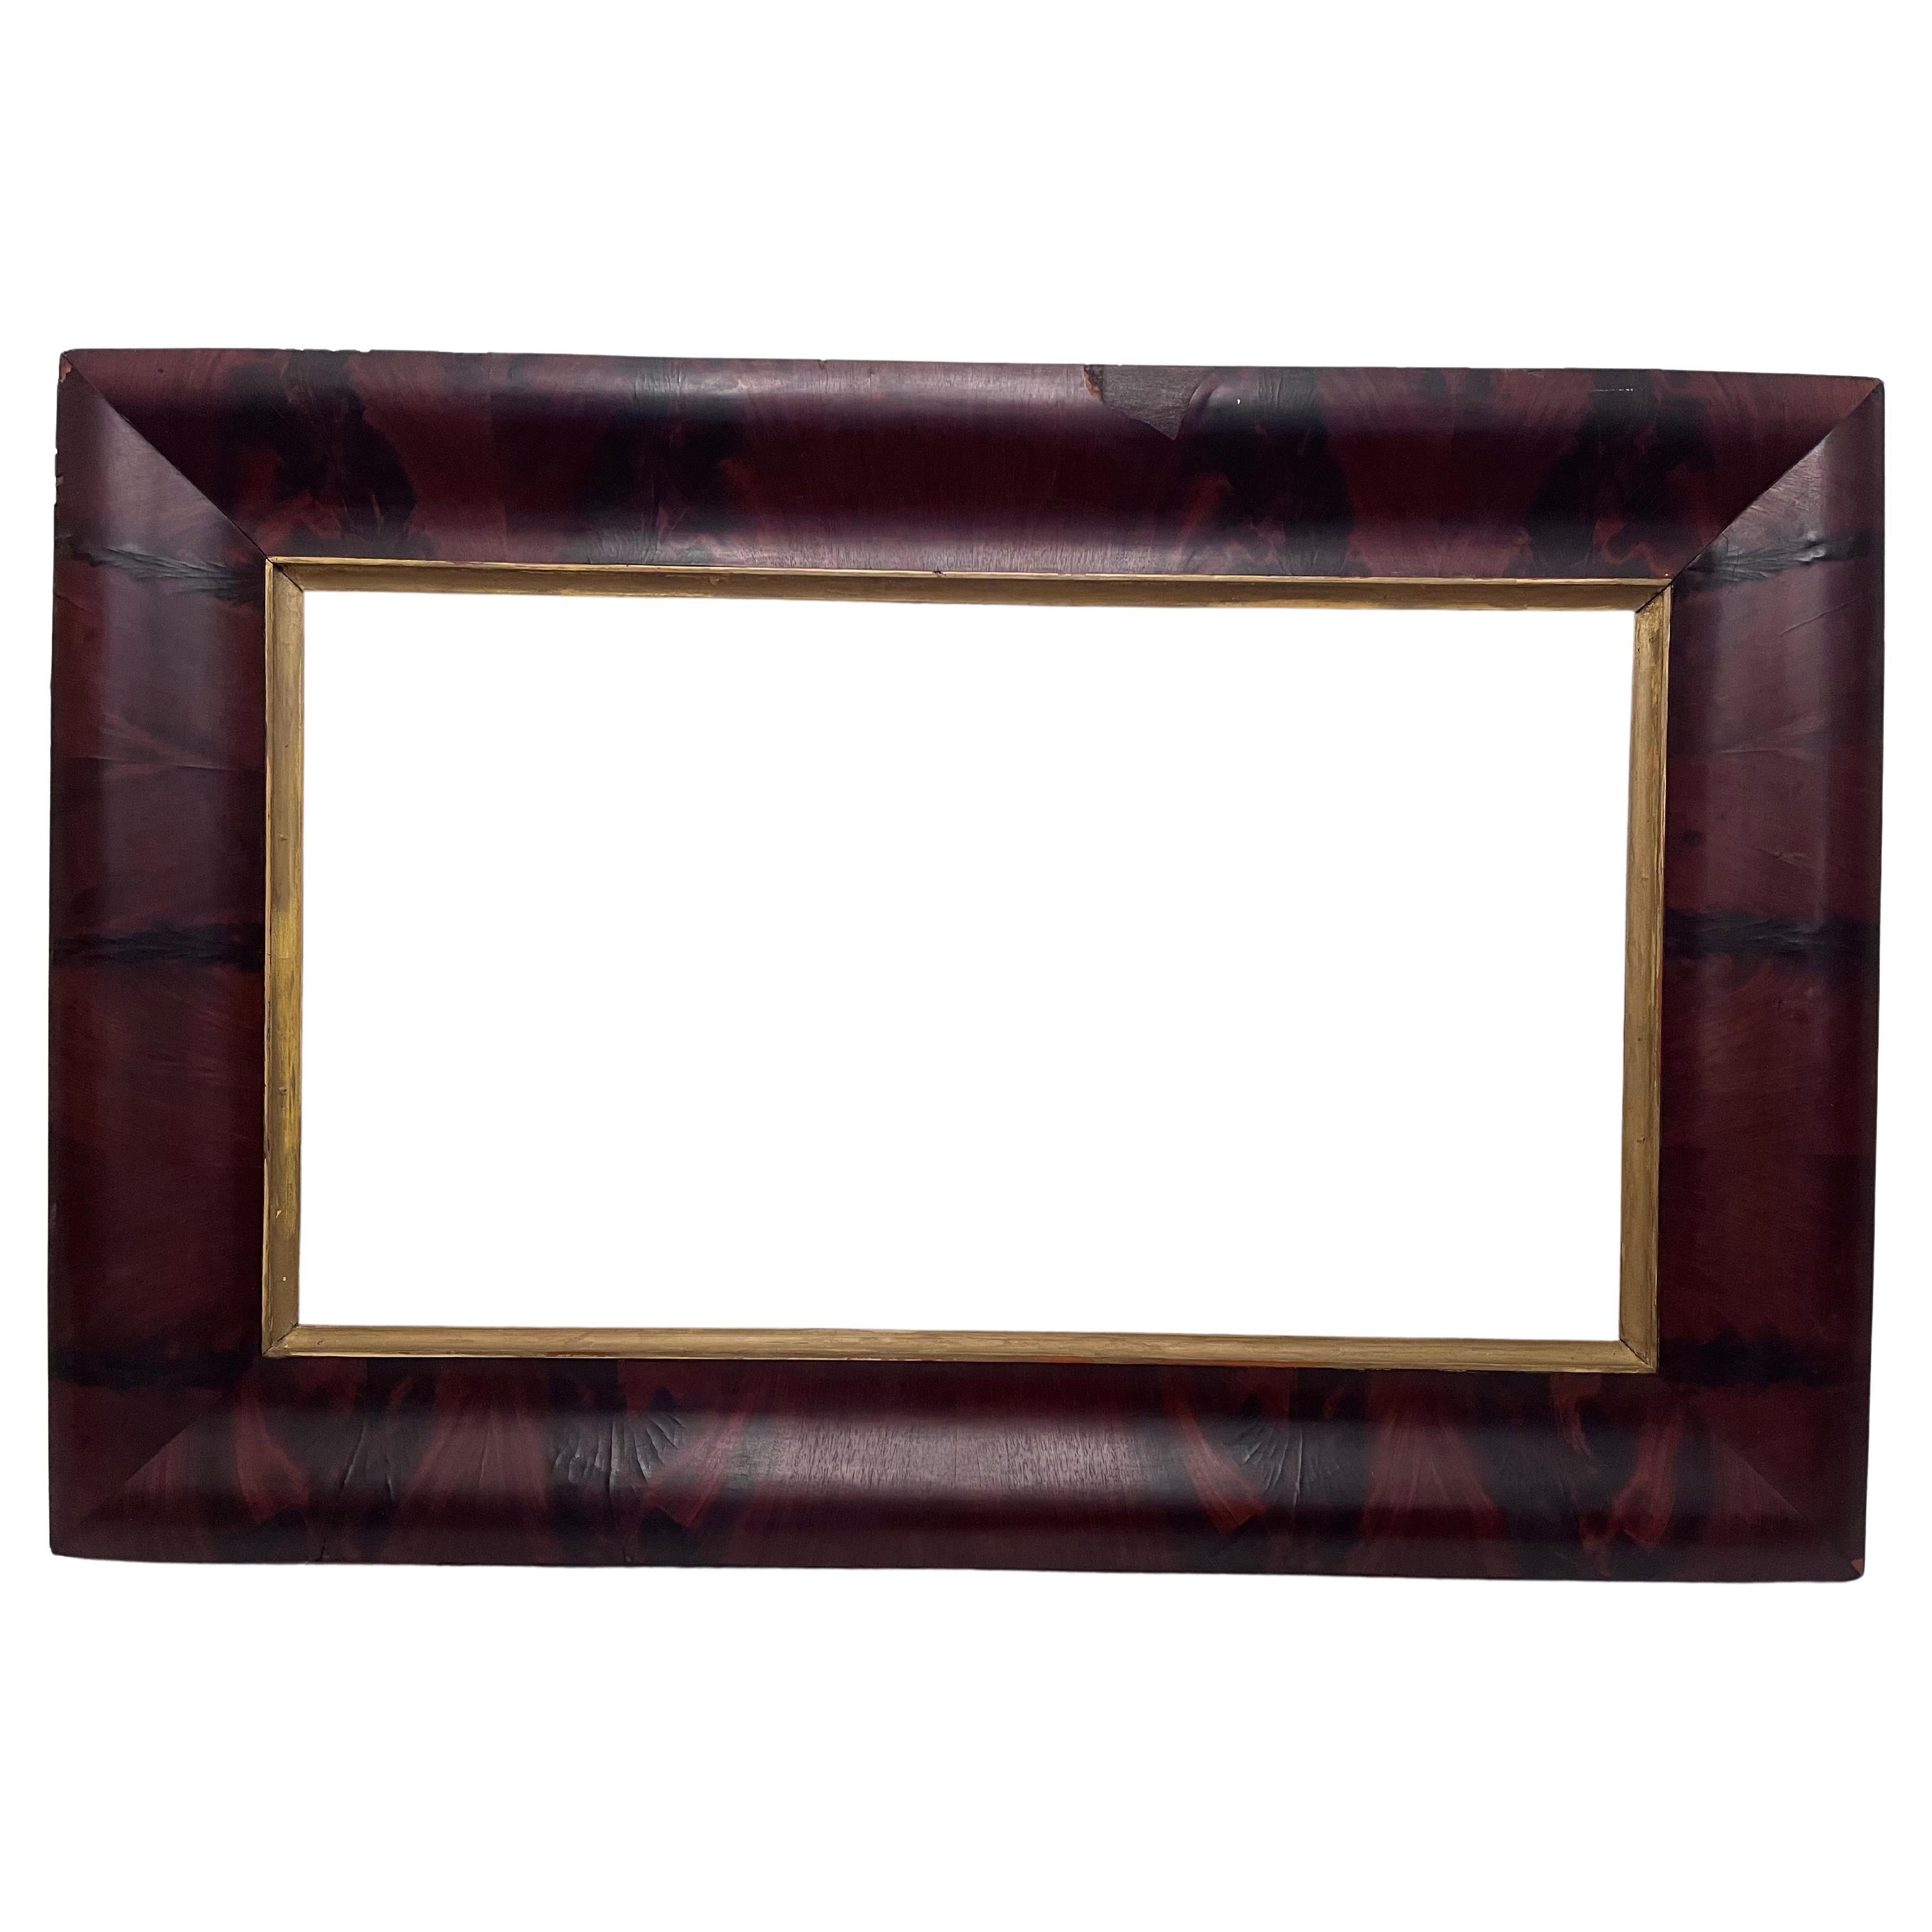 19th Century Antique Empire Style Mahogany Large Picture Frame 36 x 20 For Sale